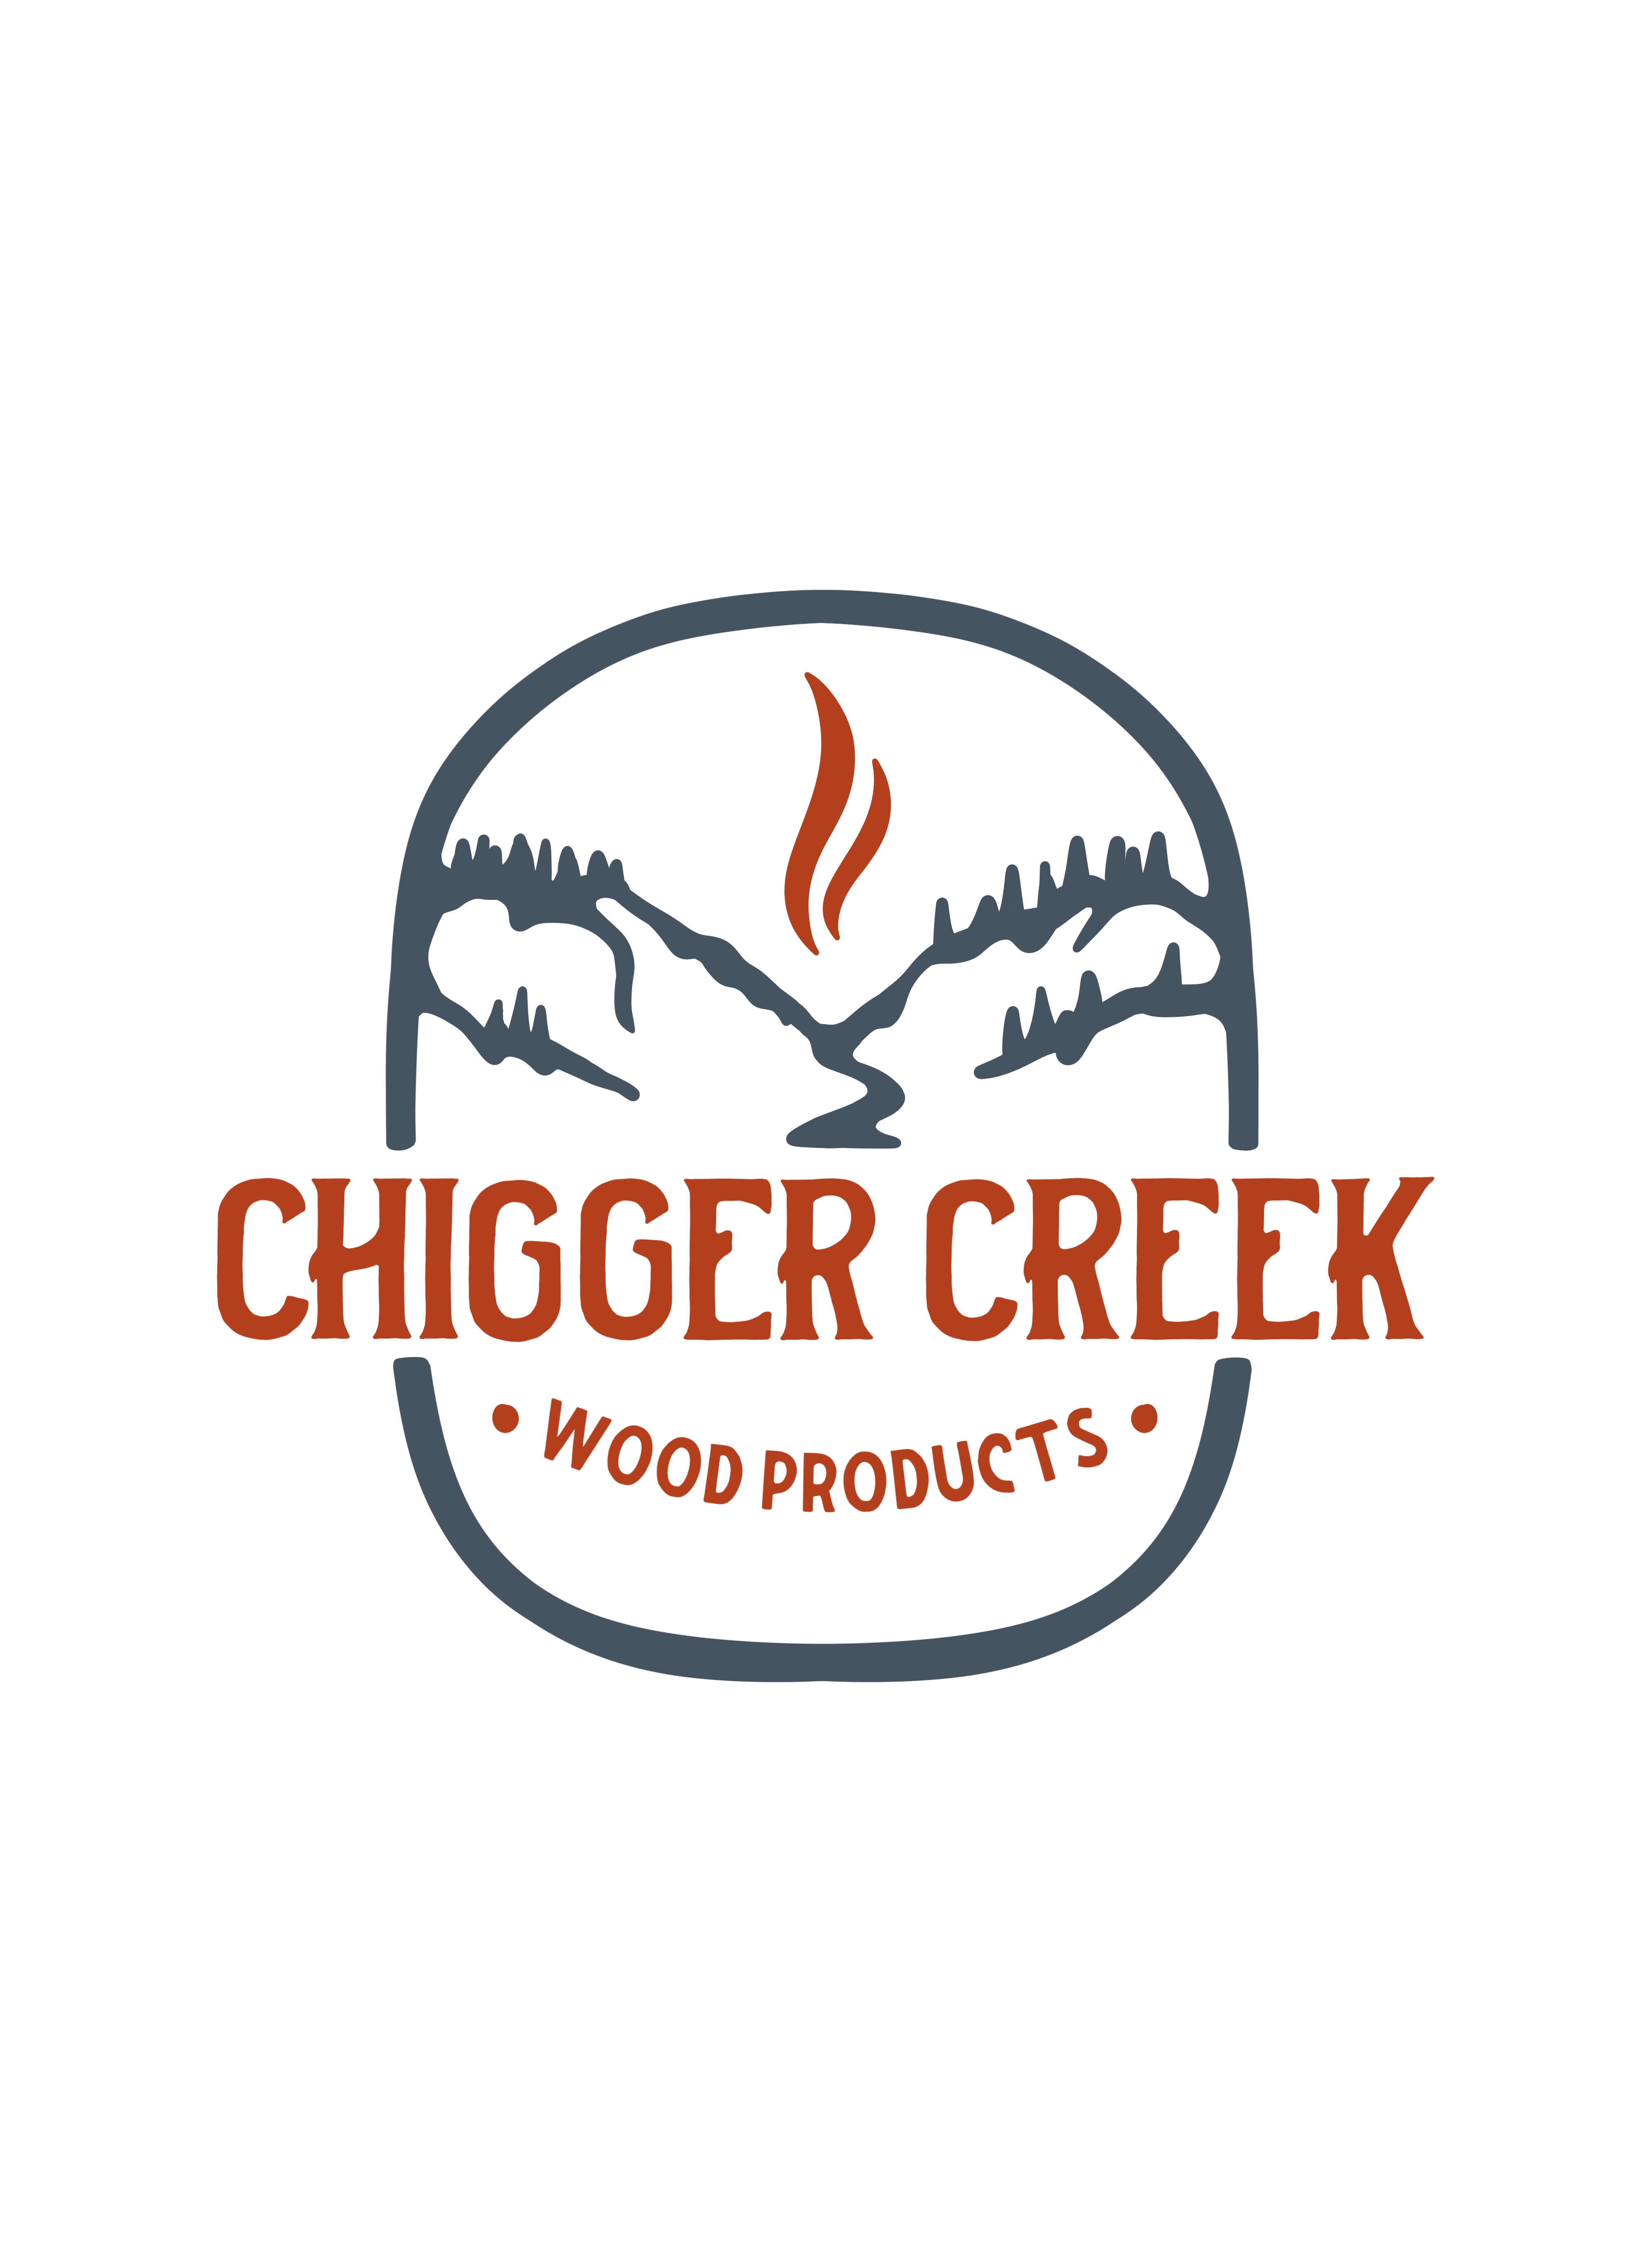 Sale Items - Chigger Creek Wood Products